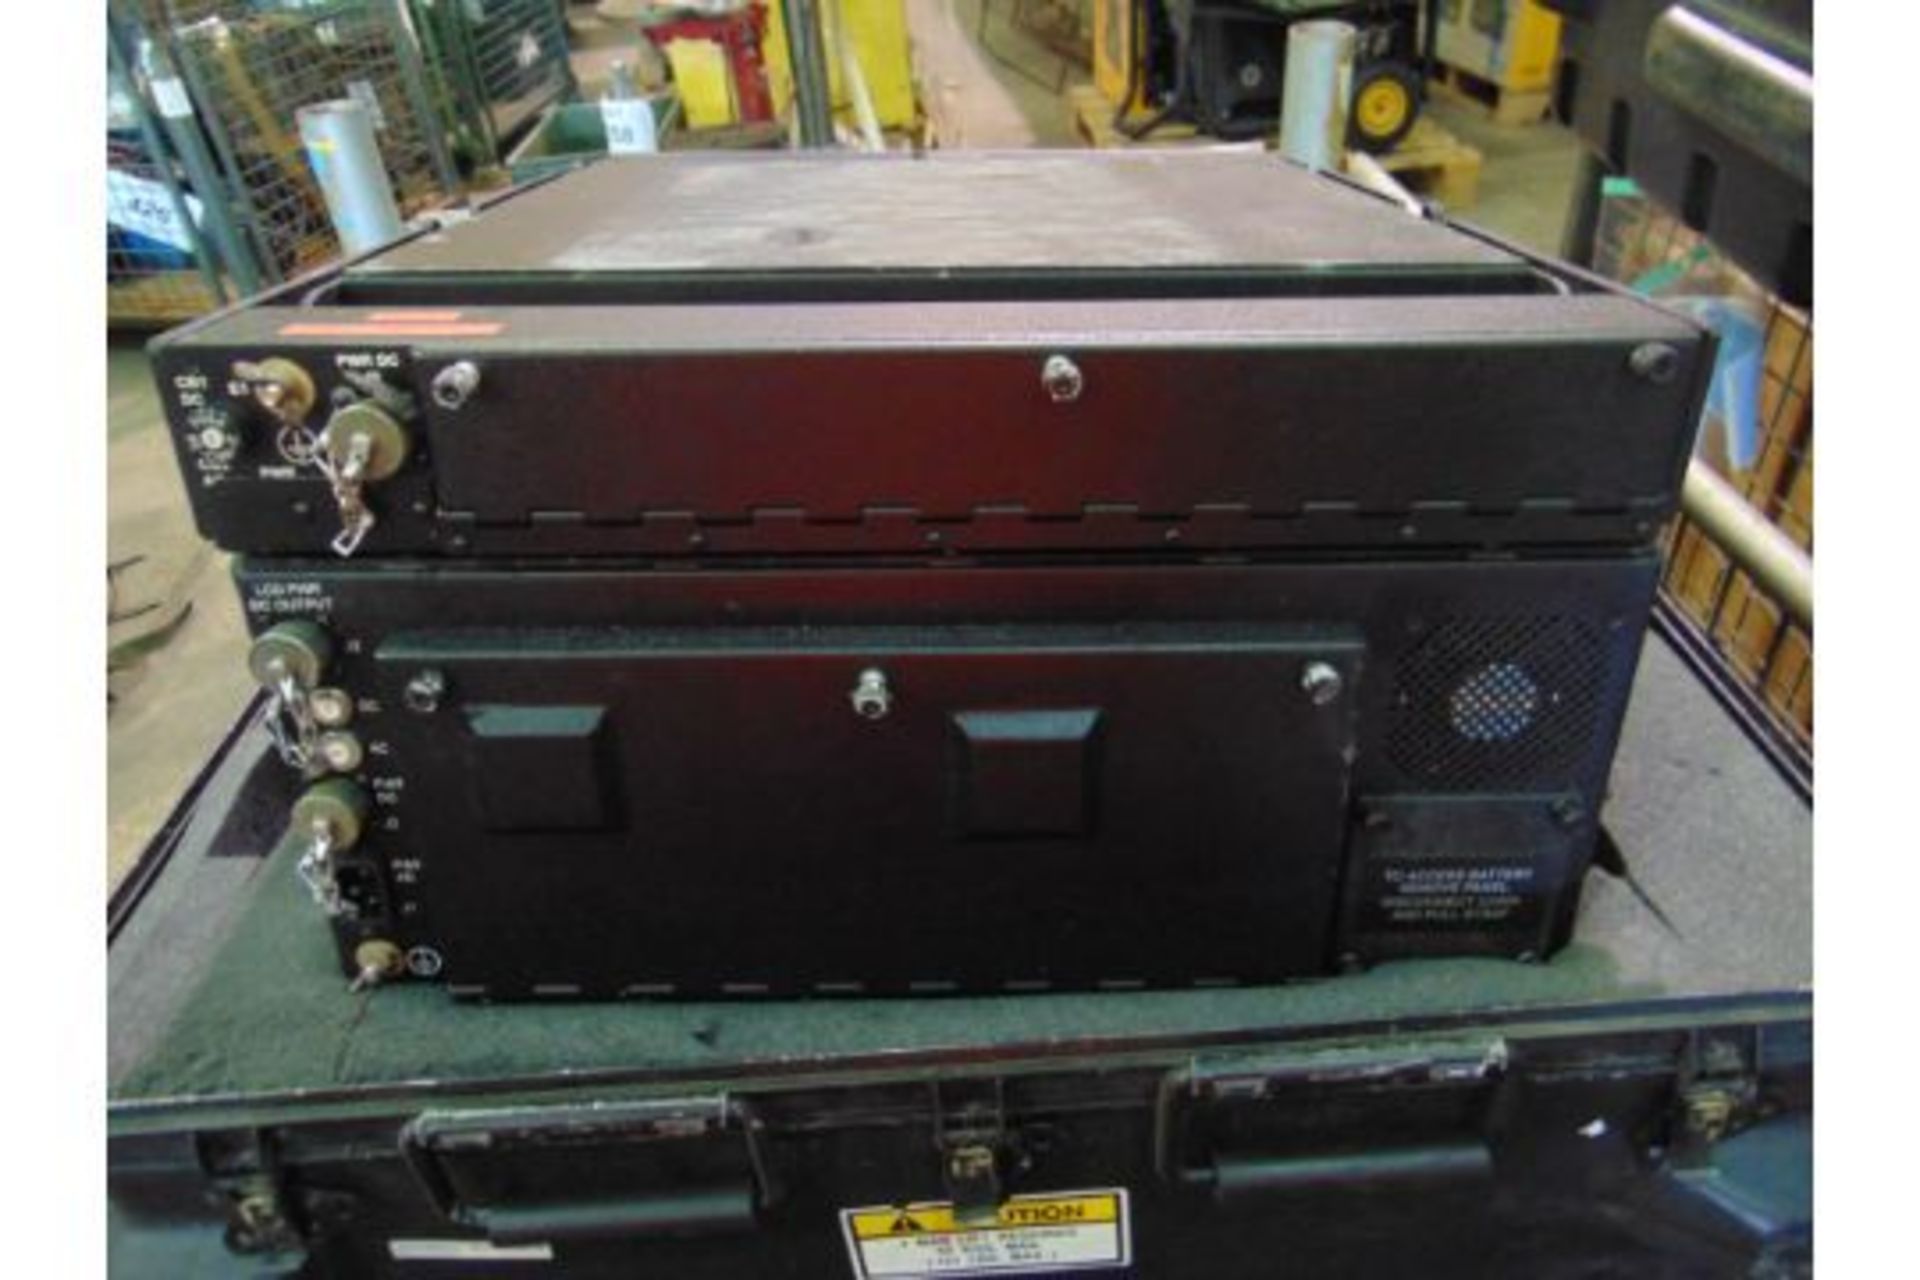 General Dynamic Military Ruggedized Portable Computer w/ Protective Transport Case - Image 10 of 14